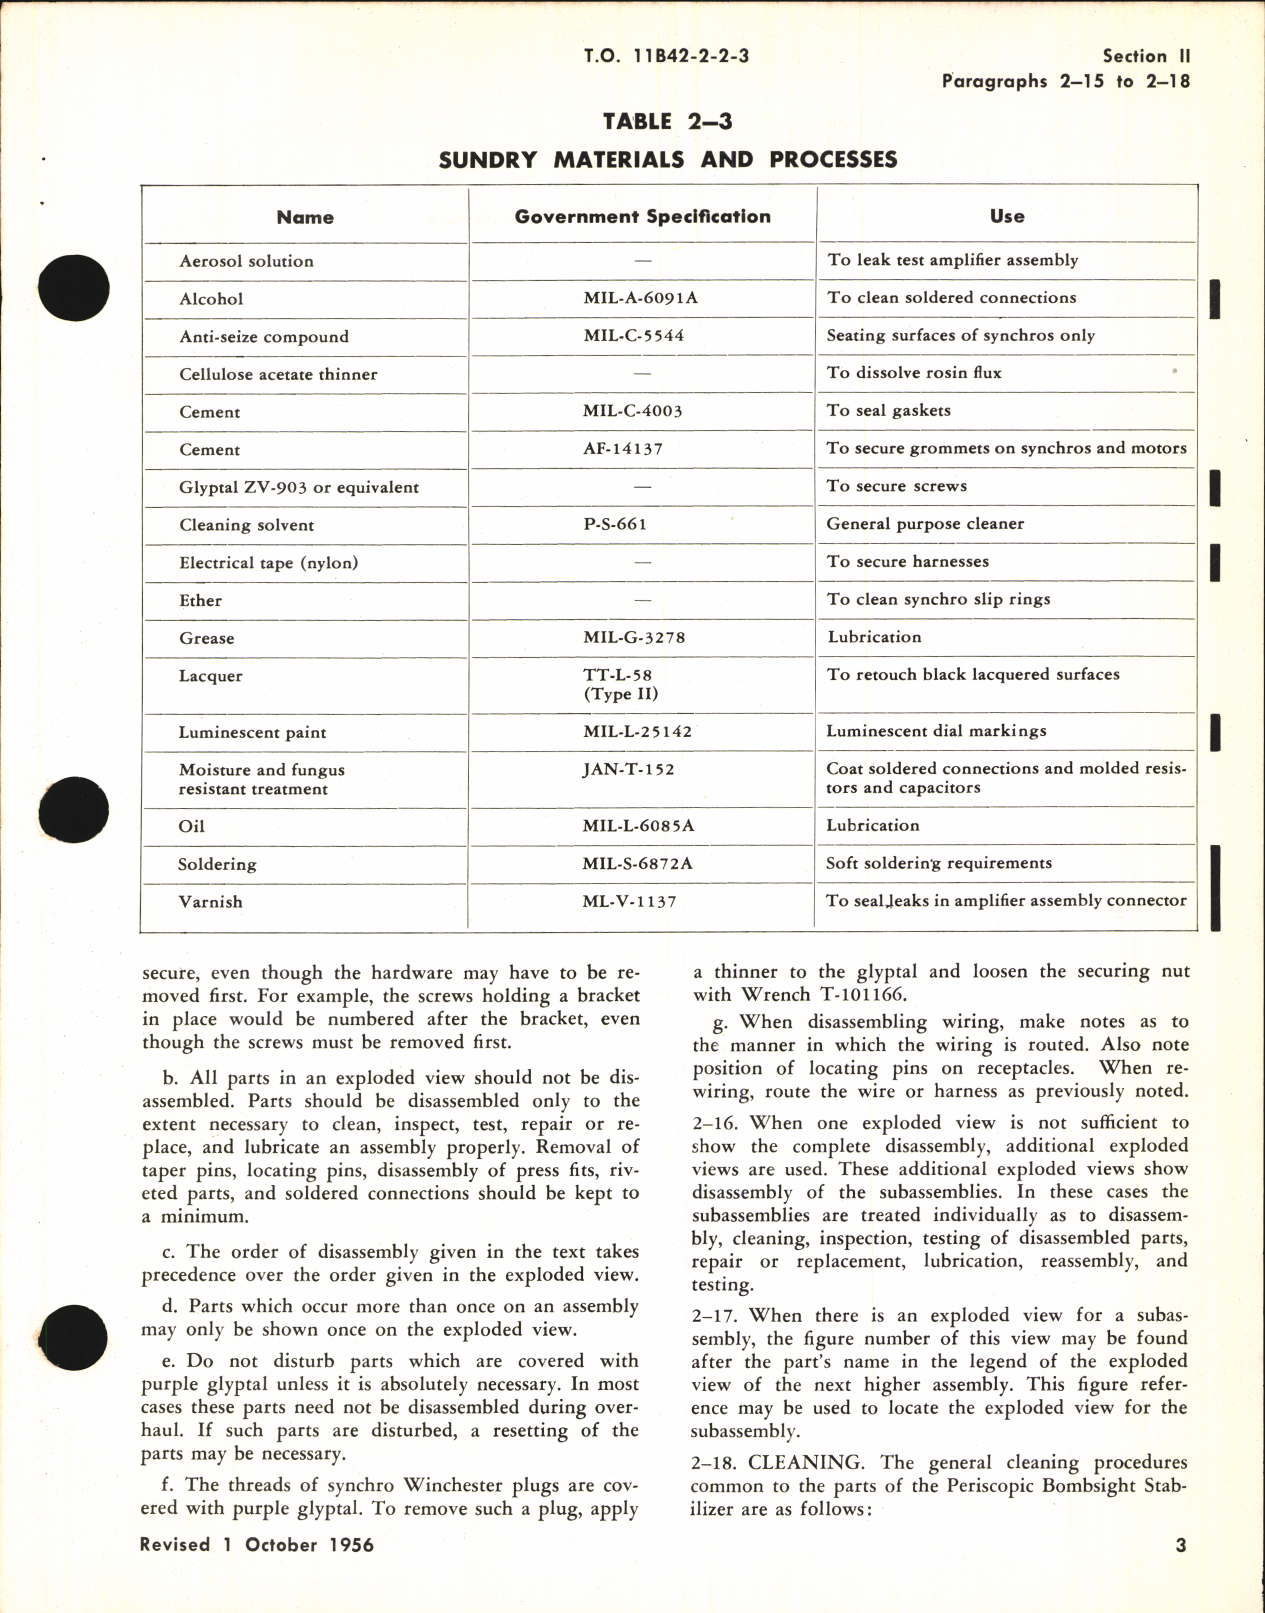 Sample page 5 from AirCorps Library document: Overhaul Instructions for Periscopic Bombsight Stabilizer Type B-1